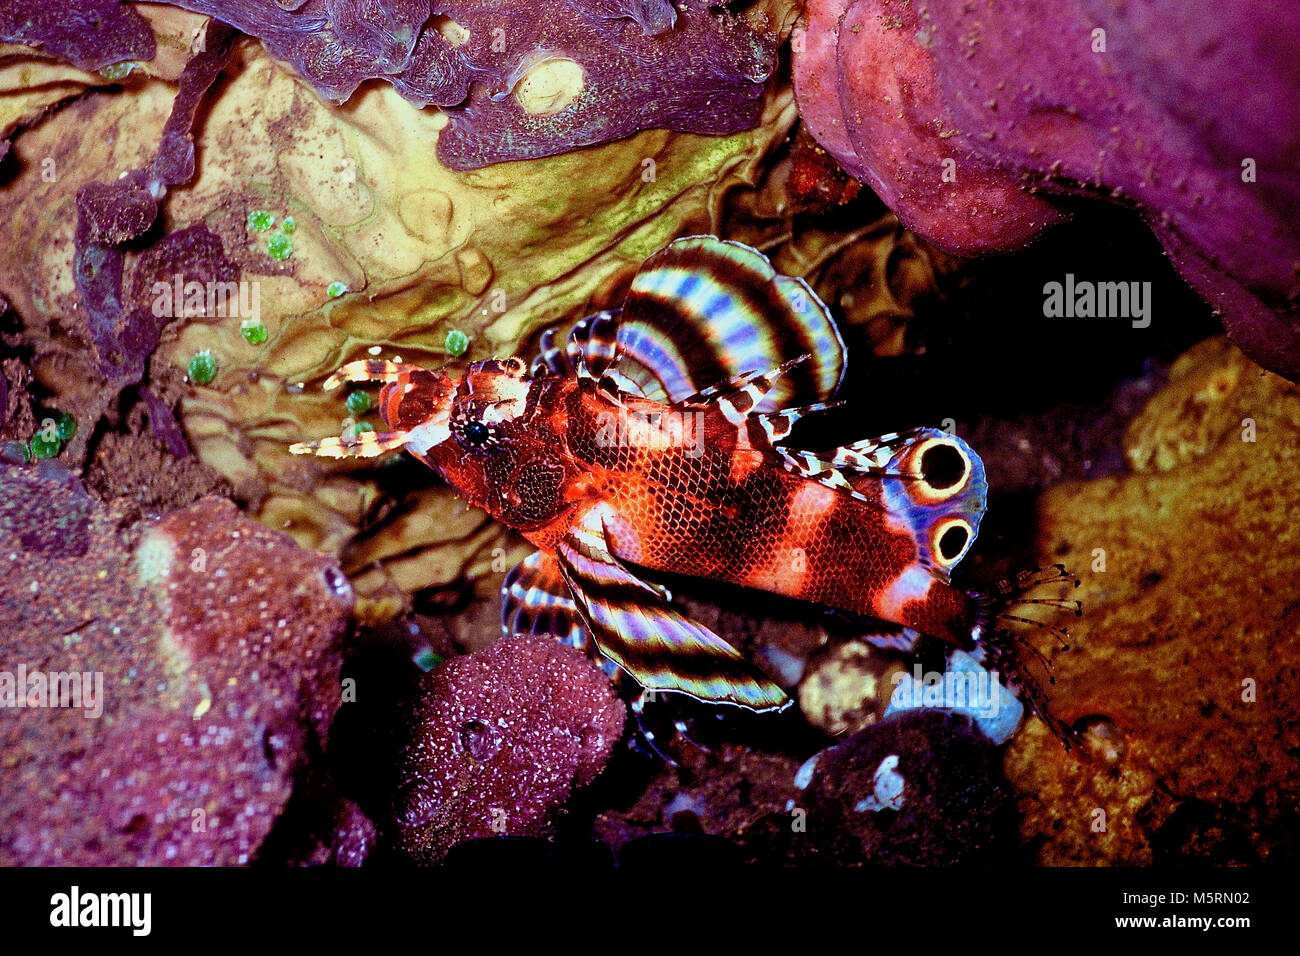 This species (Dendrochirus biocellatus: 12 cms.) has the common names of dwarf lionfish, ocellated lionfish and twospot turkeyfish. It has two feeler-like tentacles in front of its mouth, a striking colourful pattern on its pectoral fins and a pair of spots on its dorsal fin. Its spines are highly venomous. It feeds nocturnally on small fish and crustaceans. It is rare to find it during the day (as in this instance) as it is inclined to shelter in coral crevices. This individual had chosen to rest in full sight on a very life-rich part of the reef. Photographed in Balinese waters, Indonesia. Stock Photo